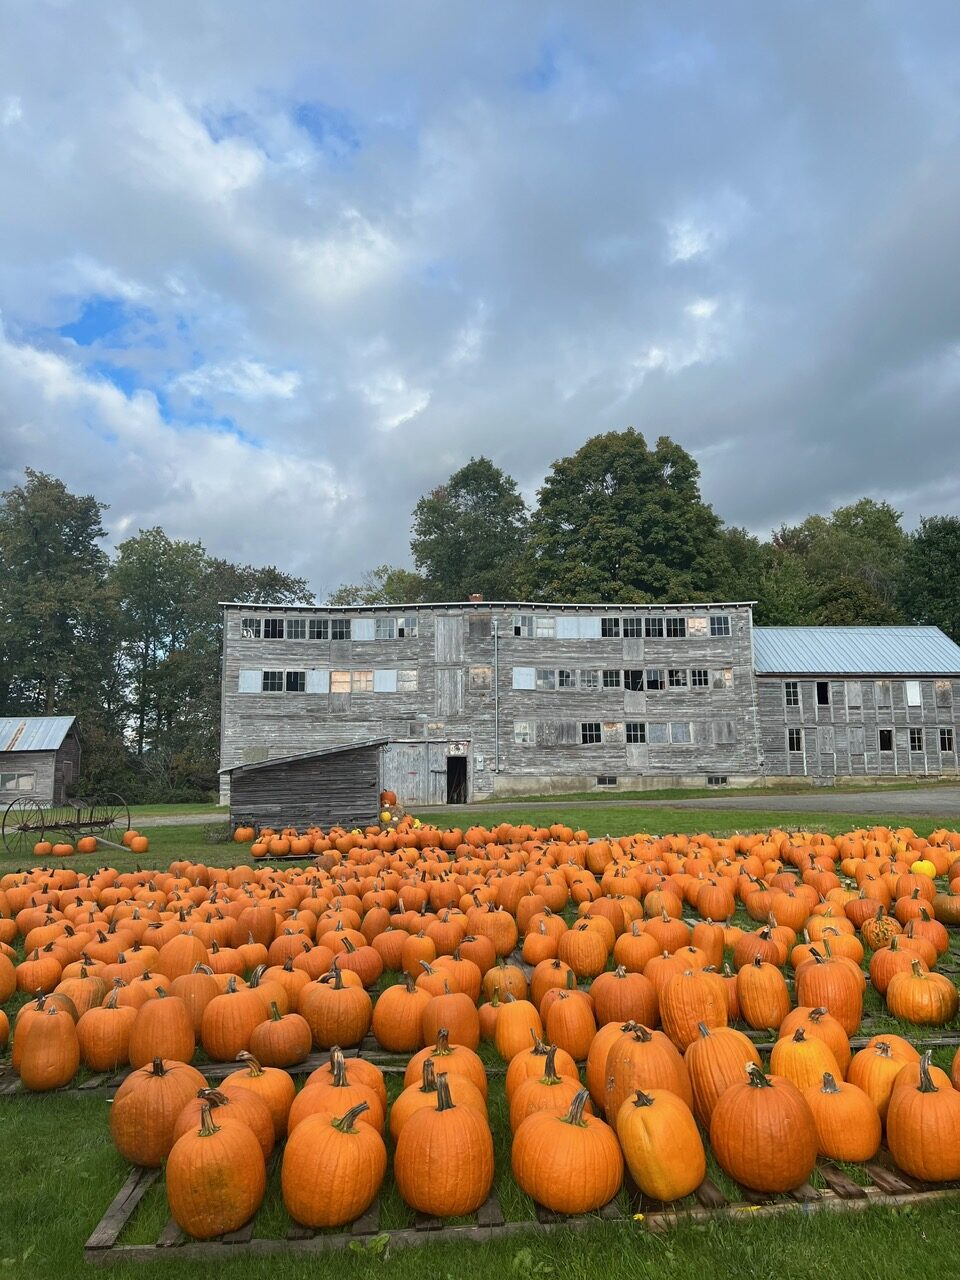 Tons of orange pumpkins line the Percy Farm Corn Maze during the fall: you can also explore the corn areas here too!